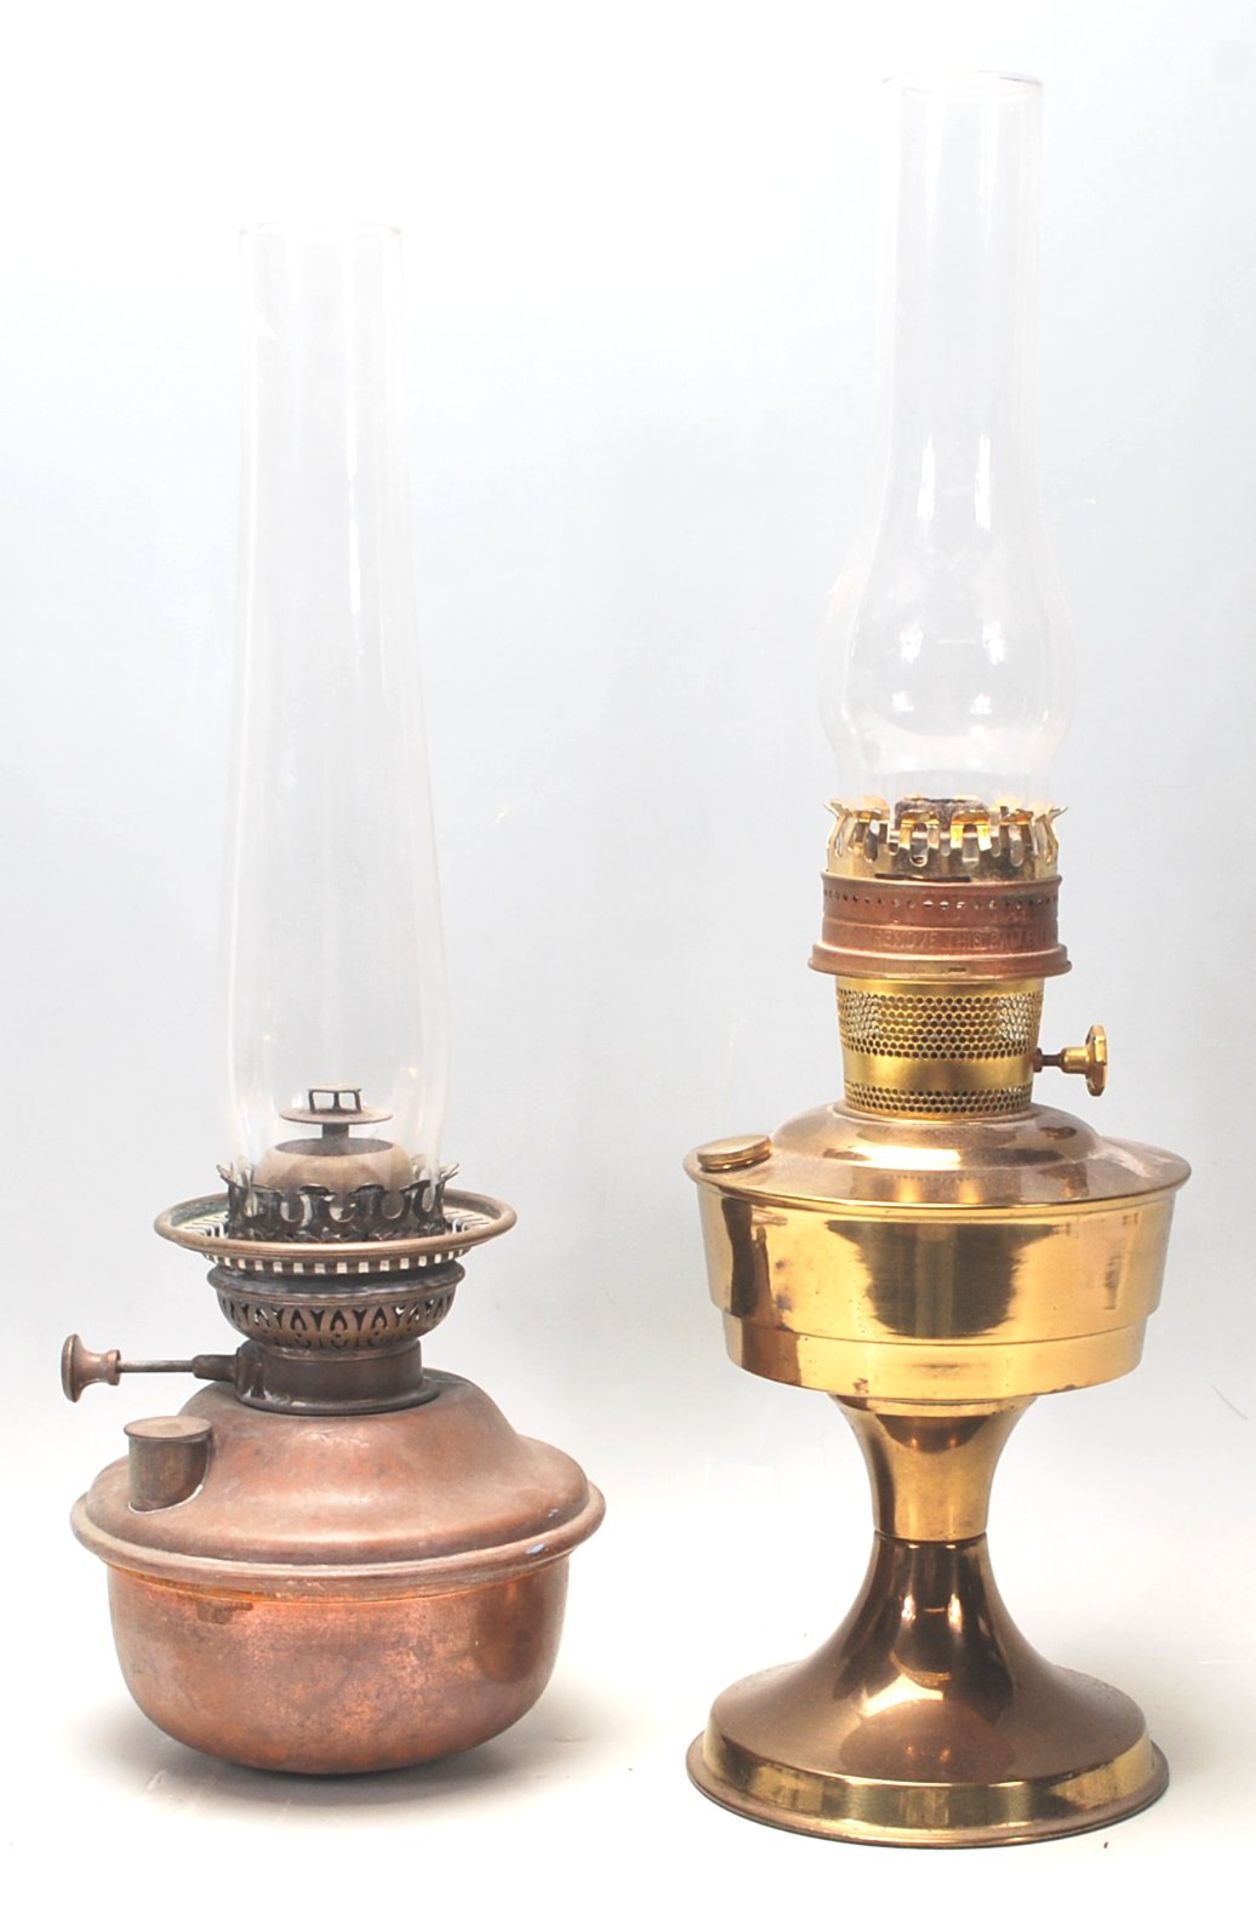 A pair of early 20th century brass oil lamps, one set on a circular base, both complete with glass